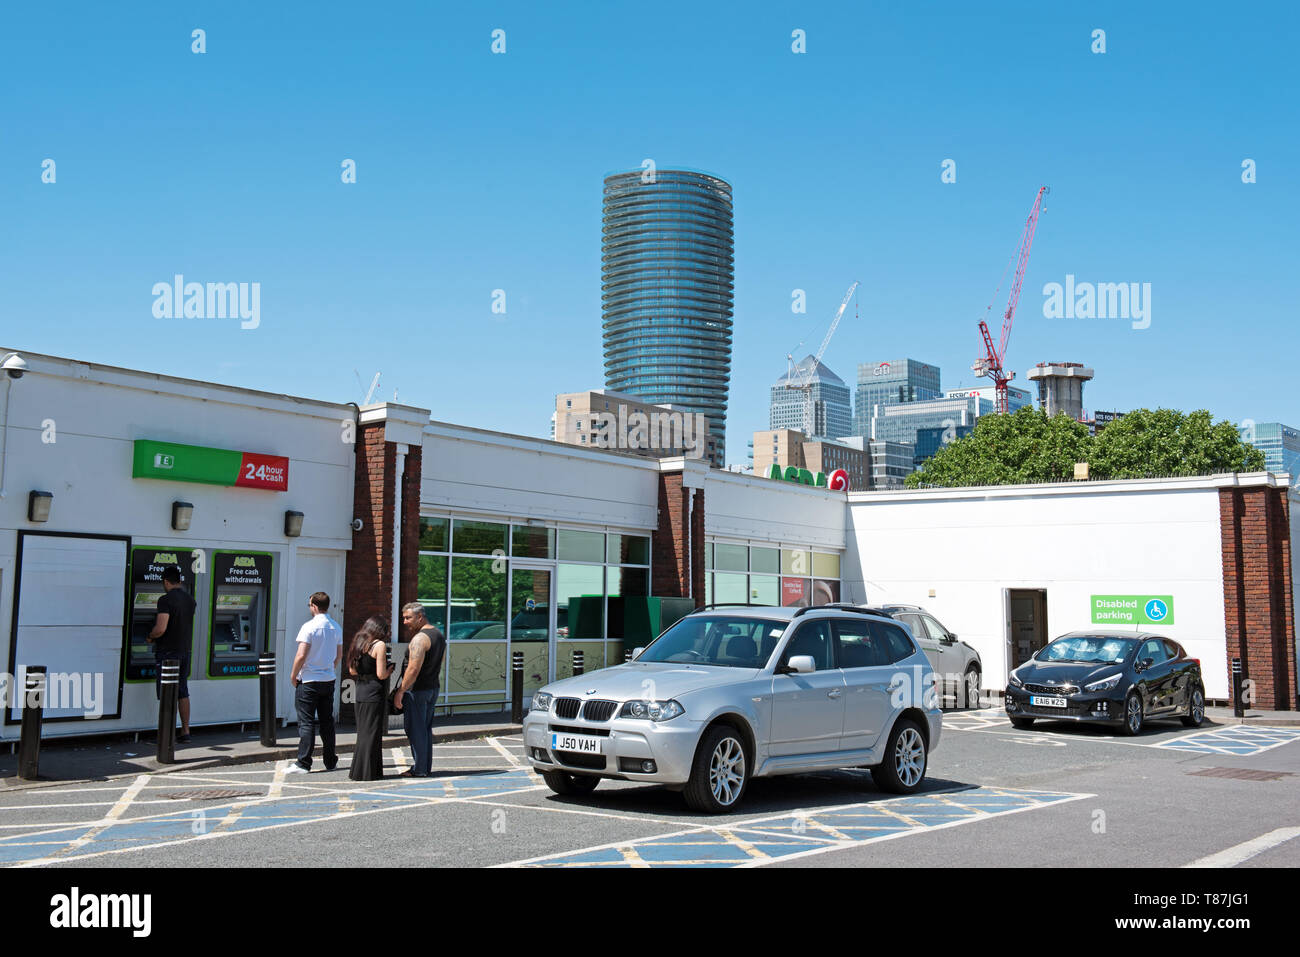 ASDA ATM cash withdrawals machine with people queuing, car park Crossharbour, Isle of Dogs, London Borough of Tower Hamlets. Stock Photo